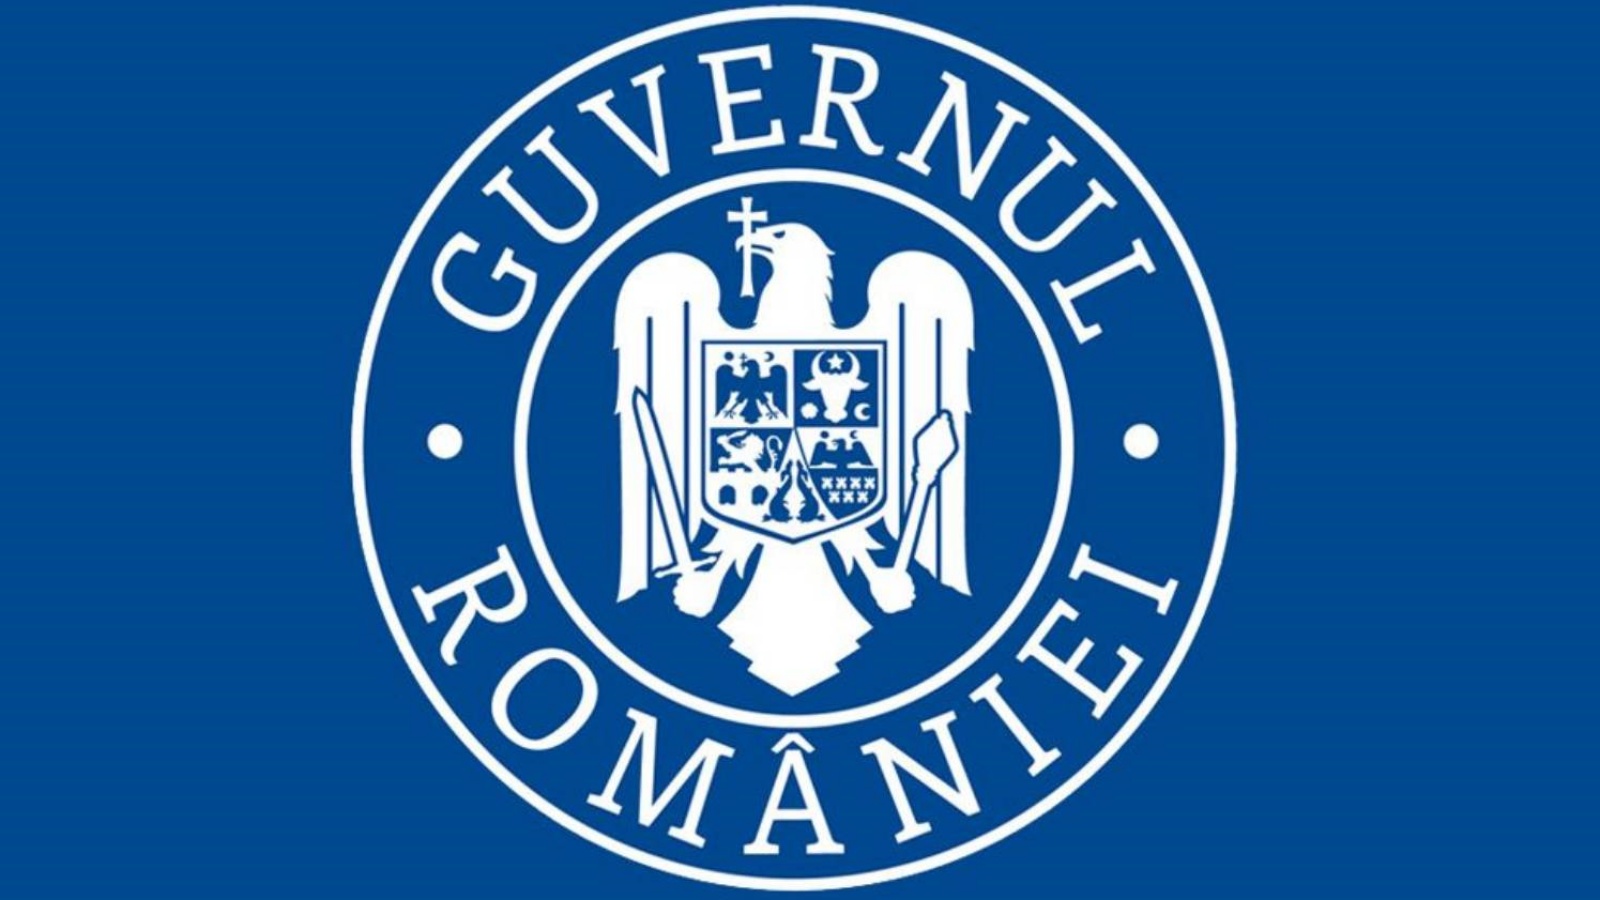 Romania Continues Economic Growth According to the Government